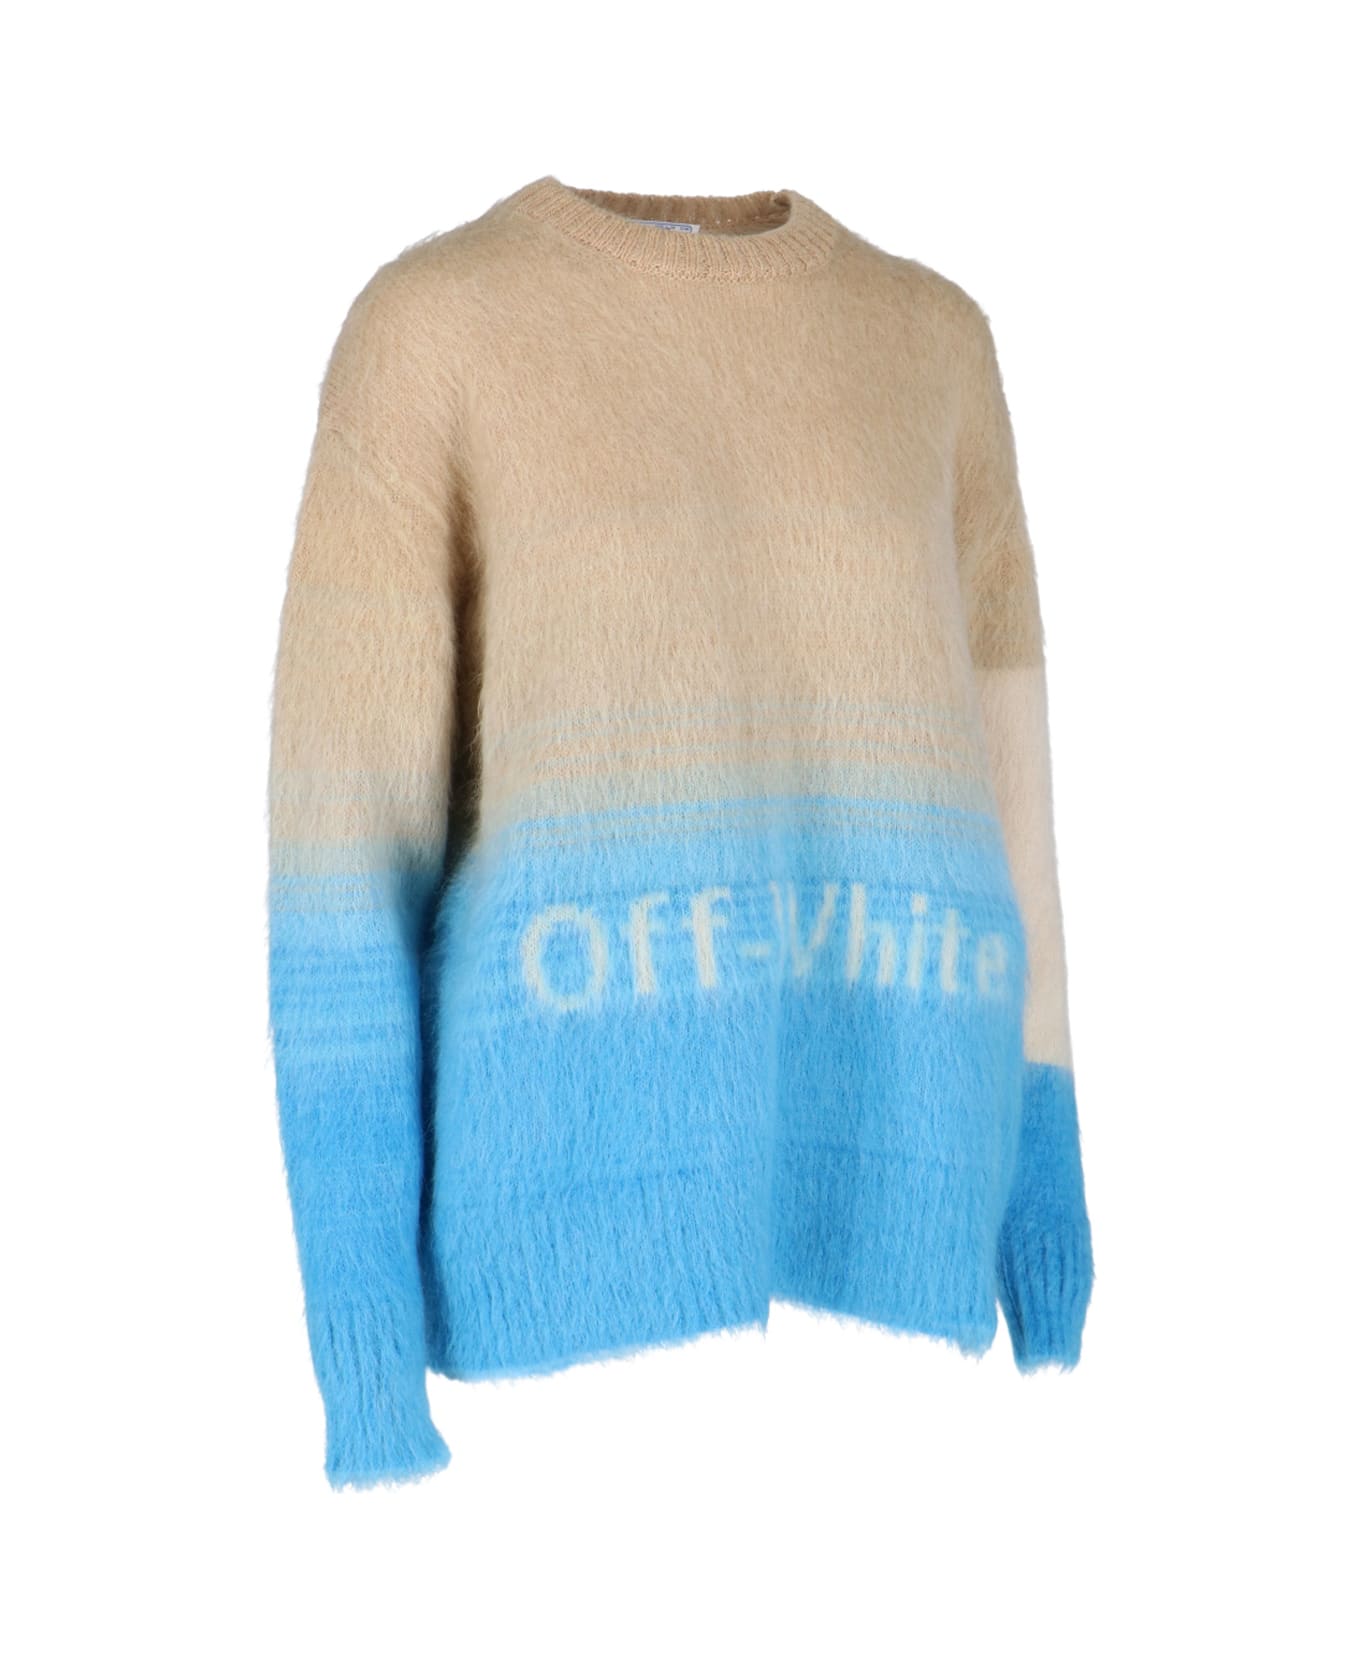 Off-White Multicolor Mohair Blend Sweater - Beige